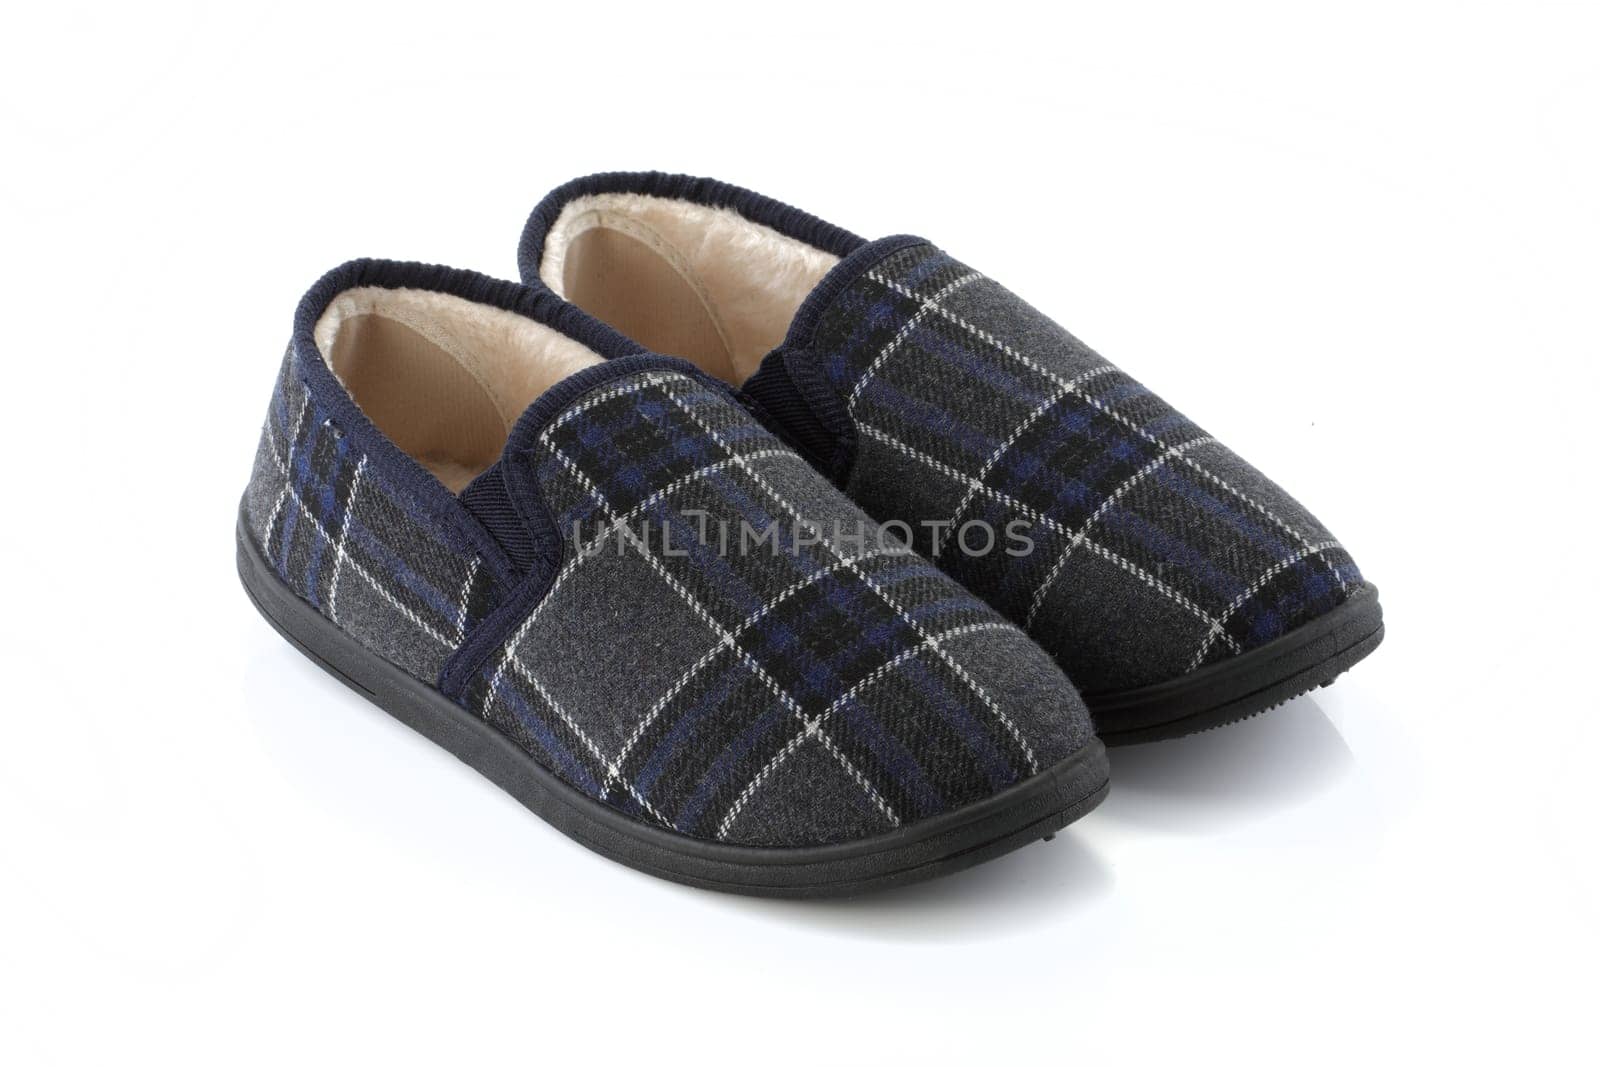 A pair of blue mens slippers